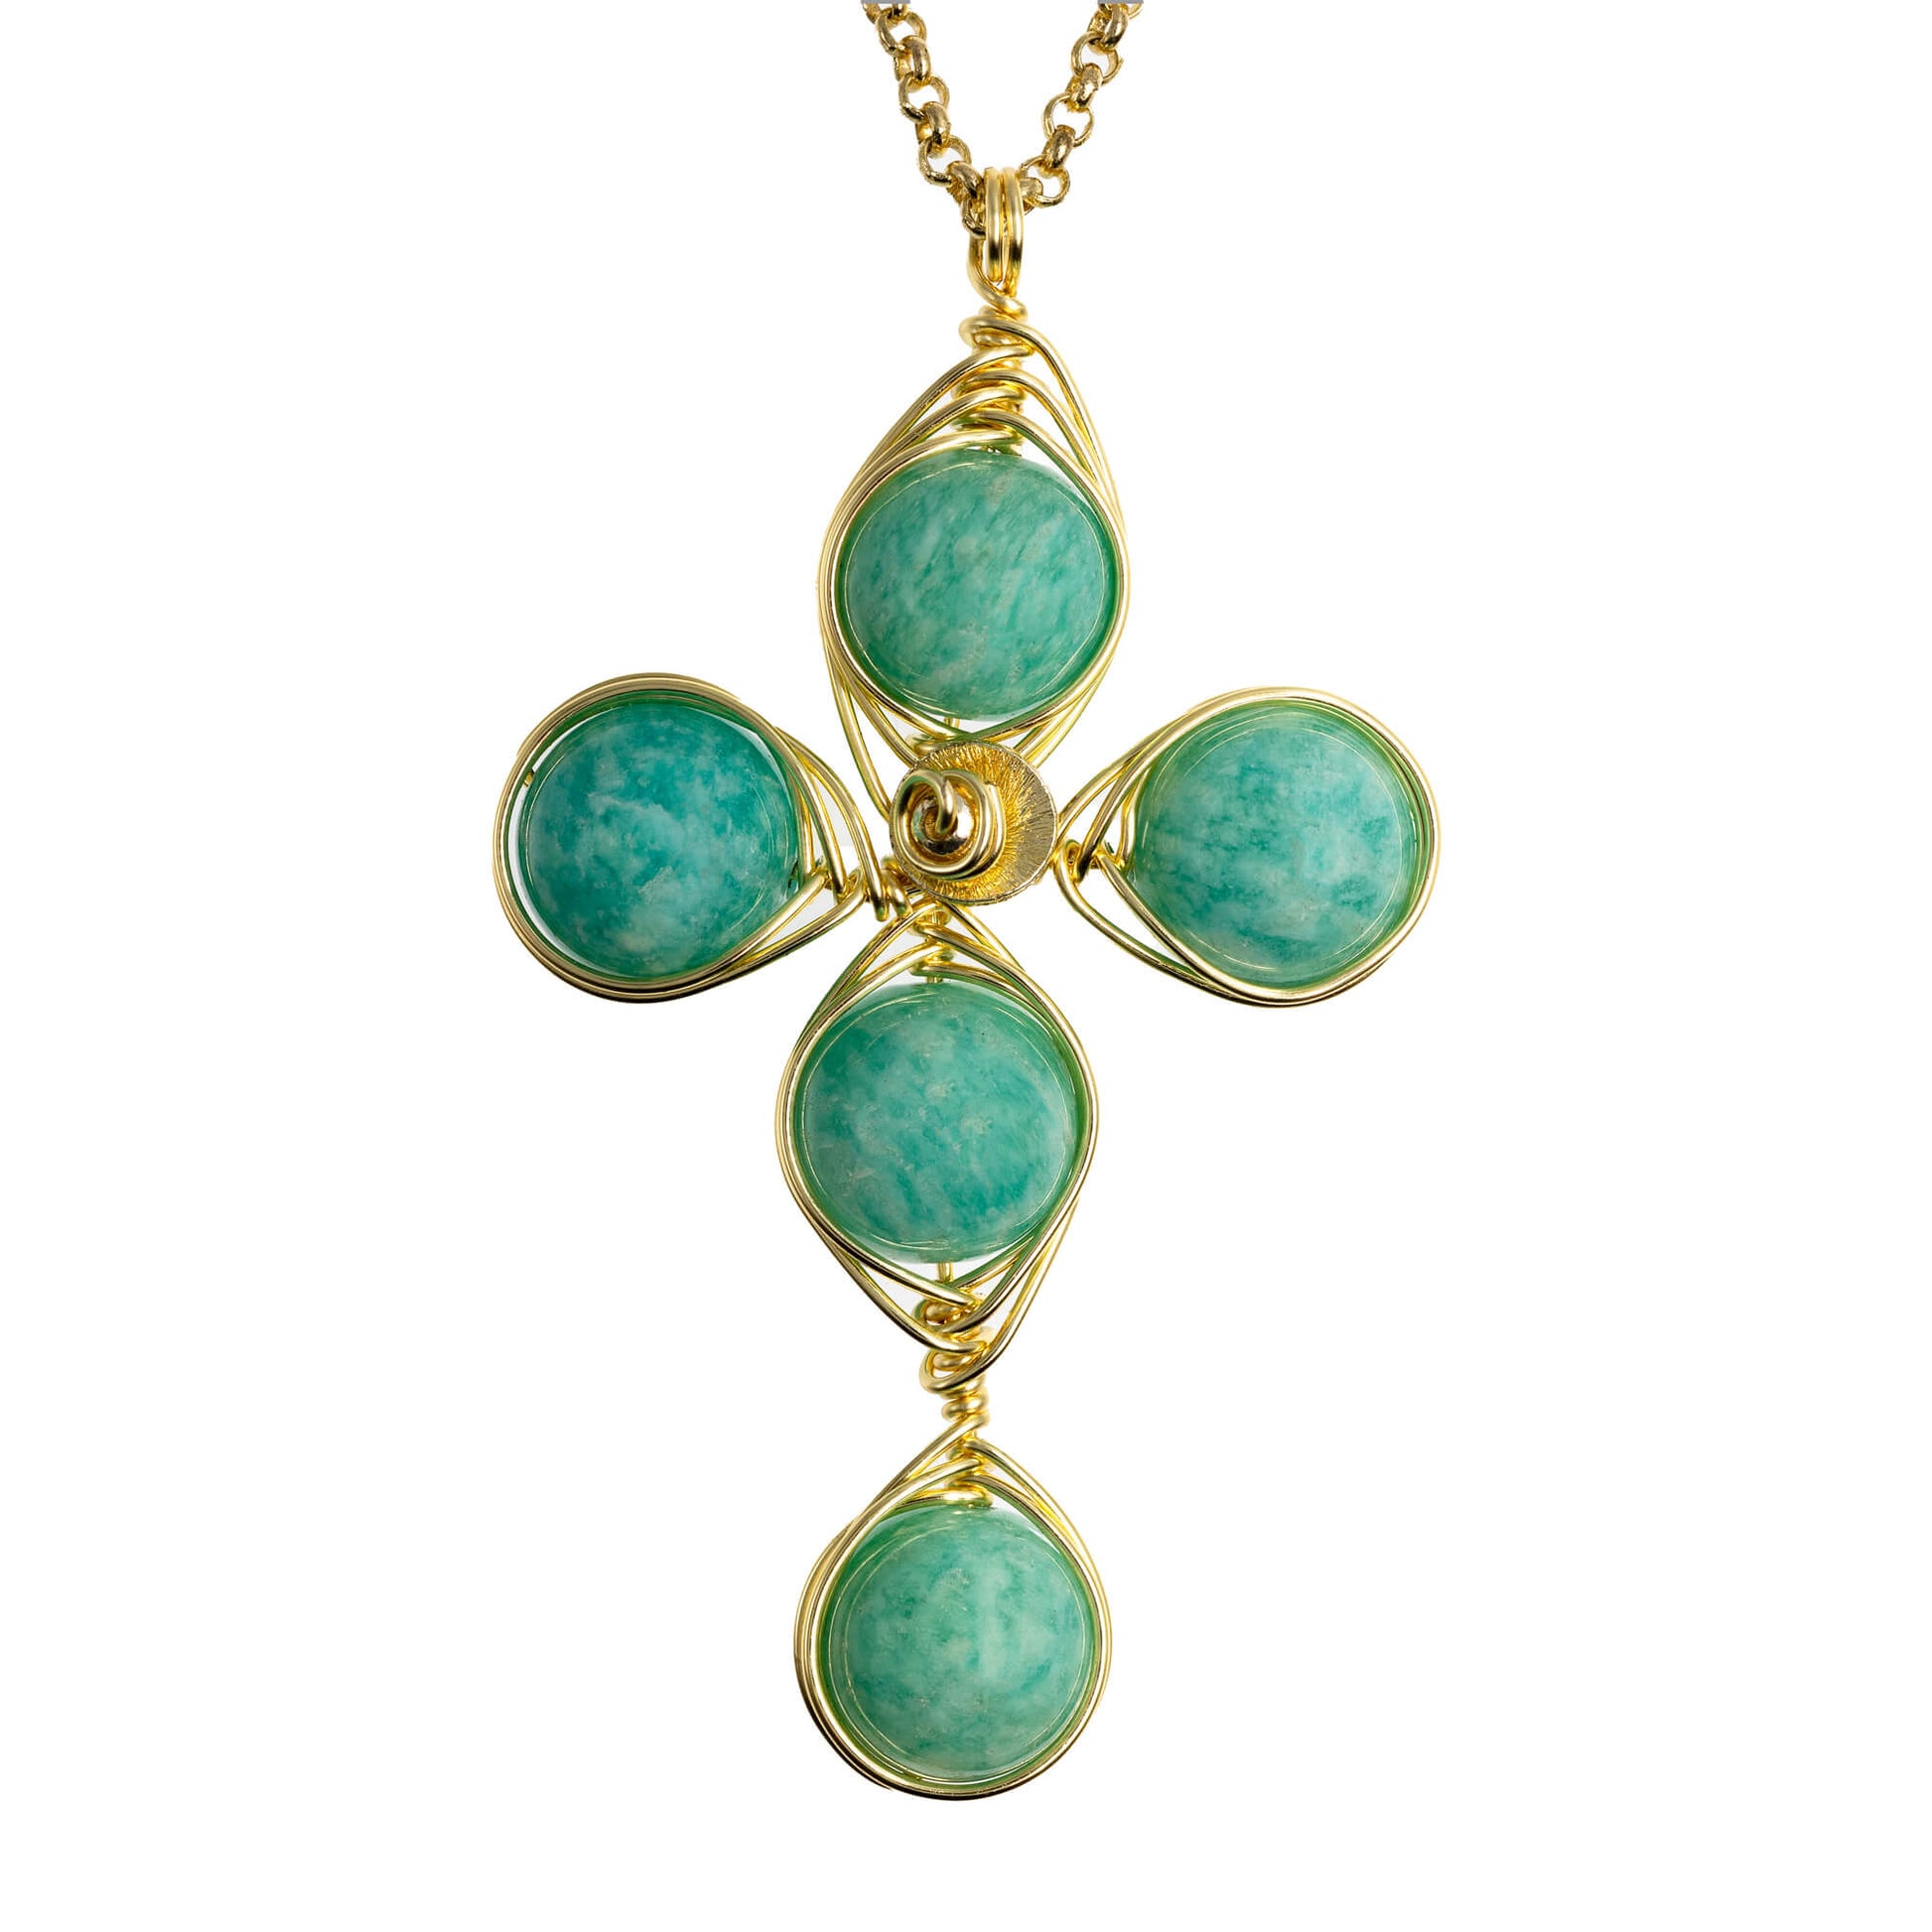 Independence Cross Pendant Necklace is 2.5 inches long on a 16 inches 22K gold plated chain. Handmade with Non-tarnish gold plated wire and Polished Amazonite Beads. Gold and clear minimalist Wired Wrapped Cross.